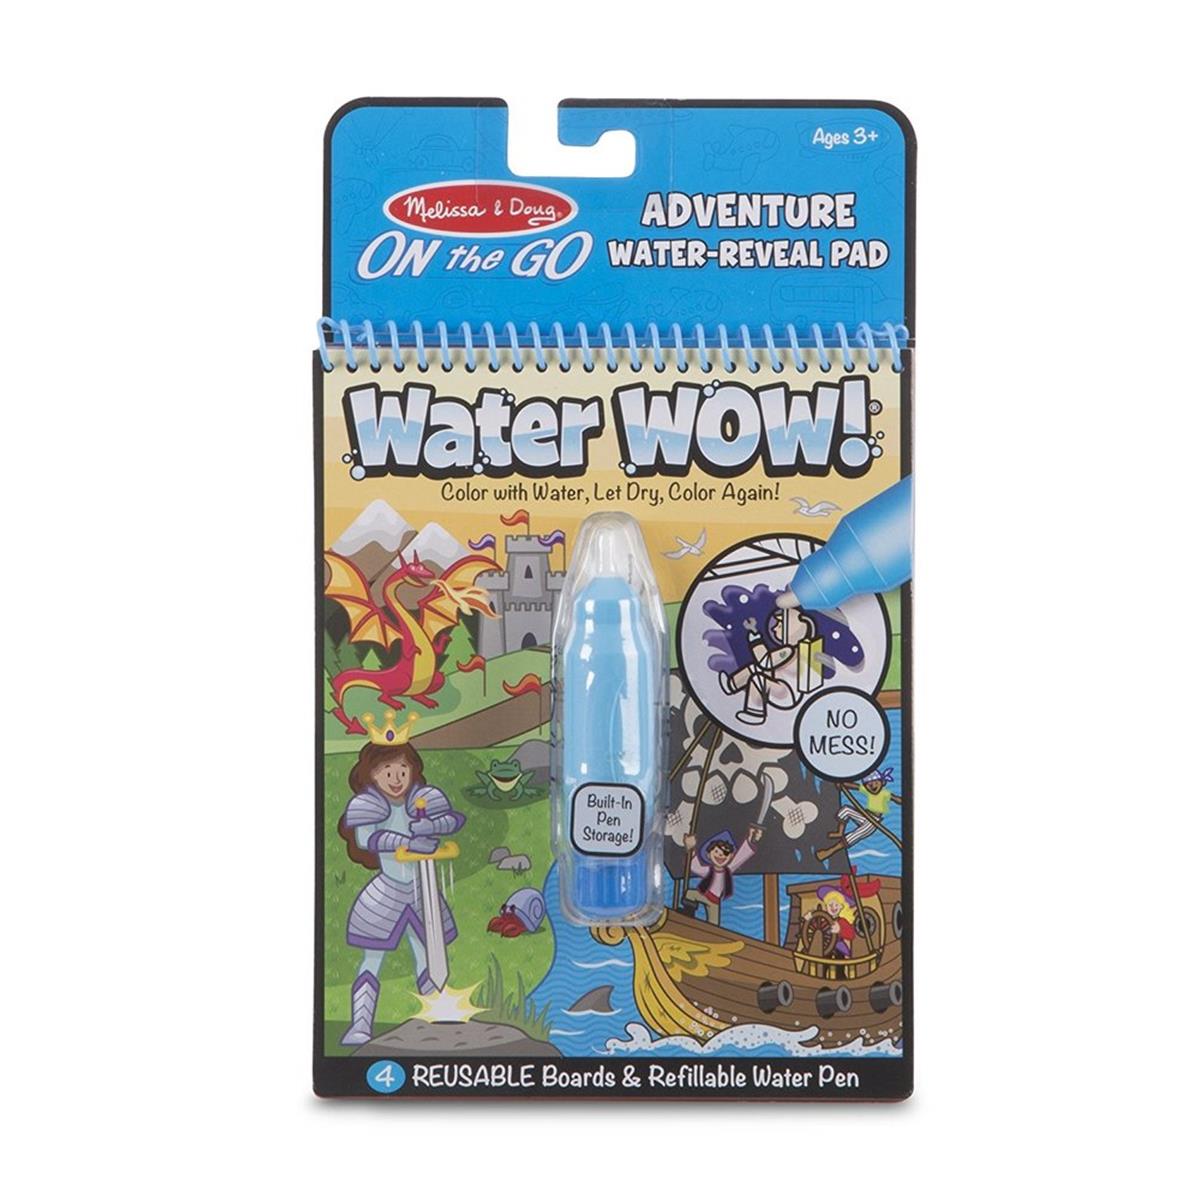 Picture of Melissa & Doug 160860 Water Wow Adventure Activity Book